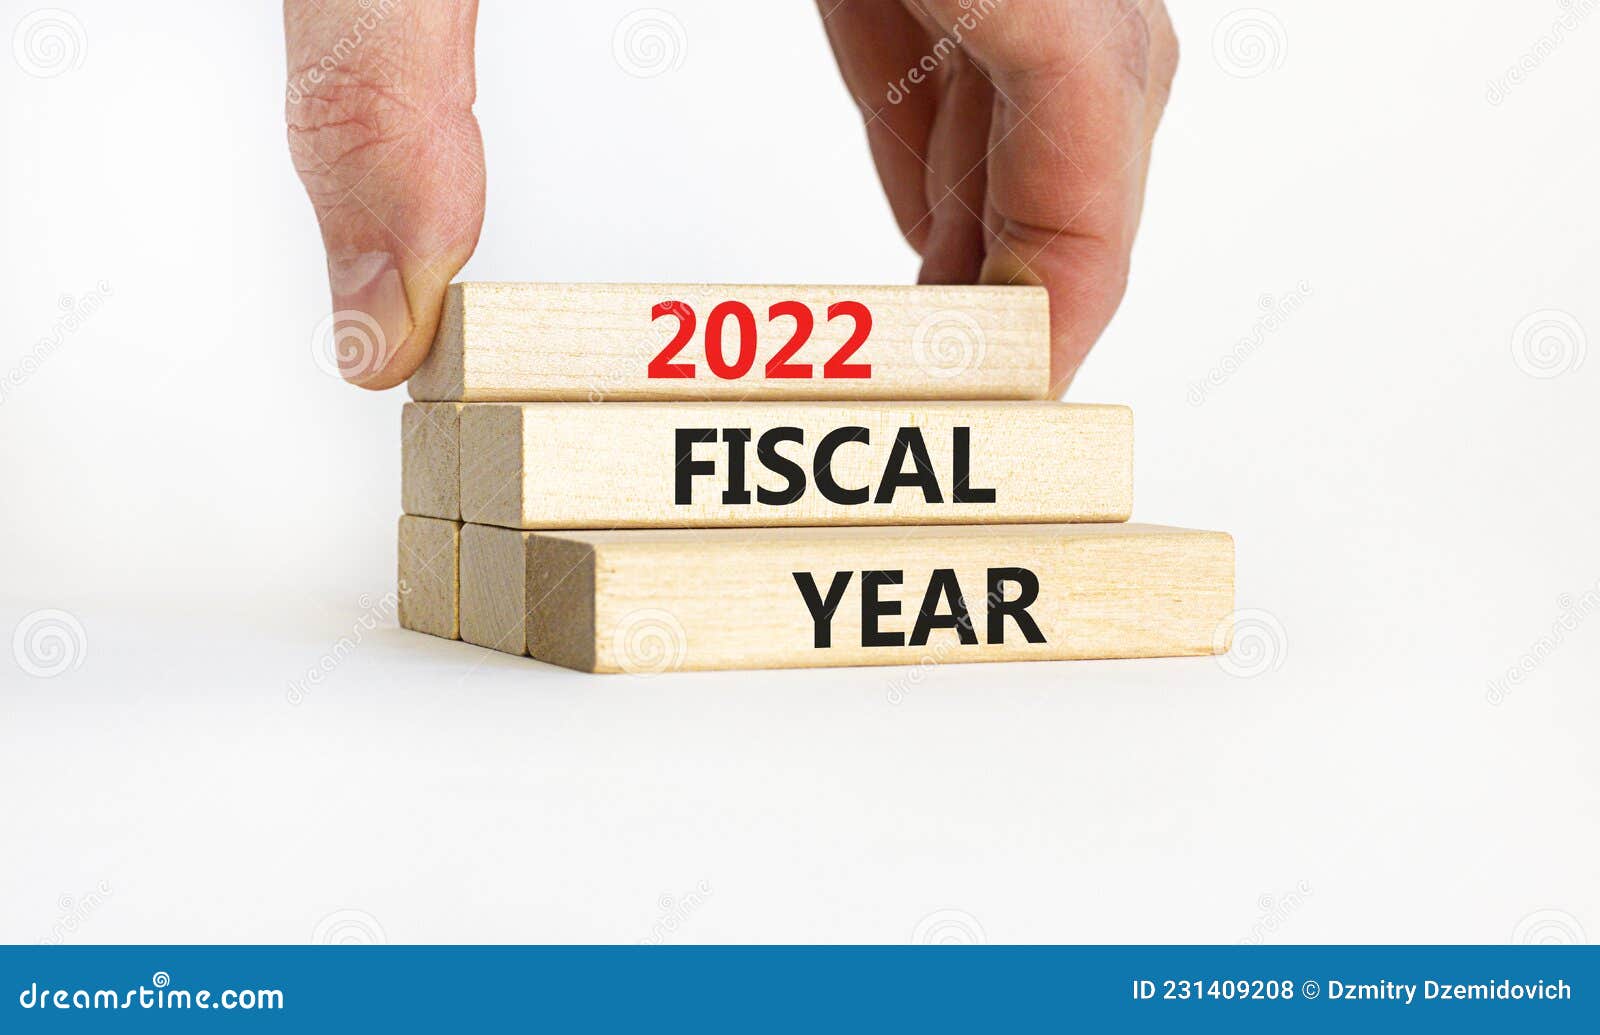 2022-fiscal-new-year-symbol-concept-words-2022-fiscal-year-on-wooden